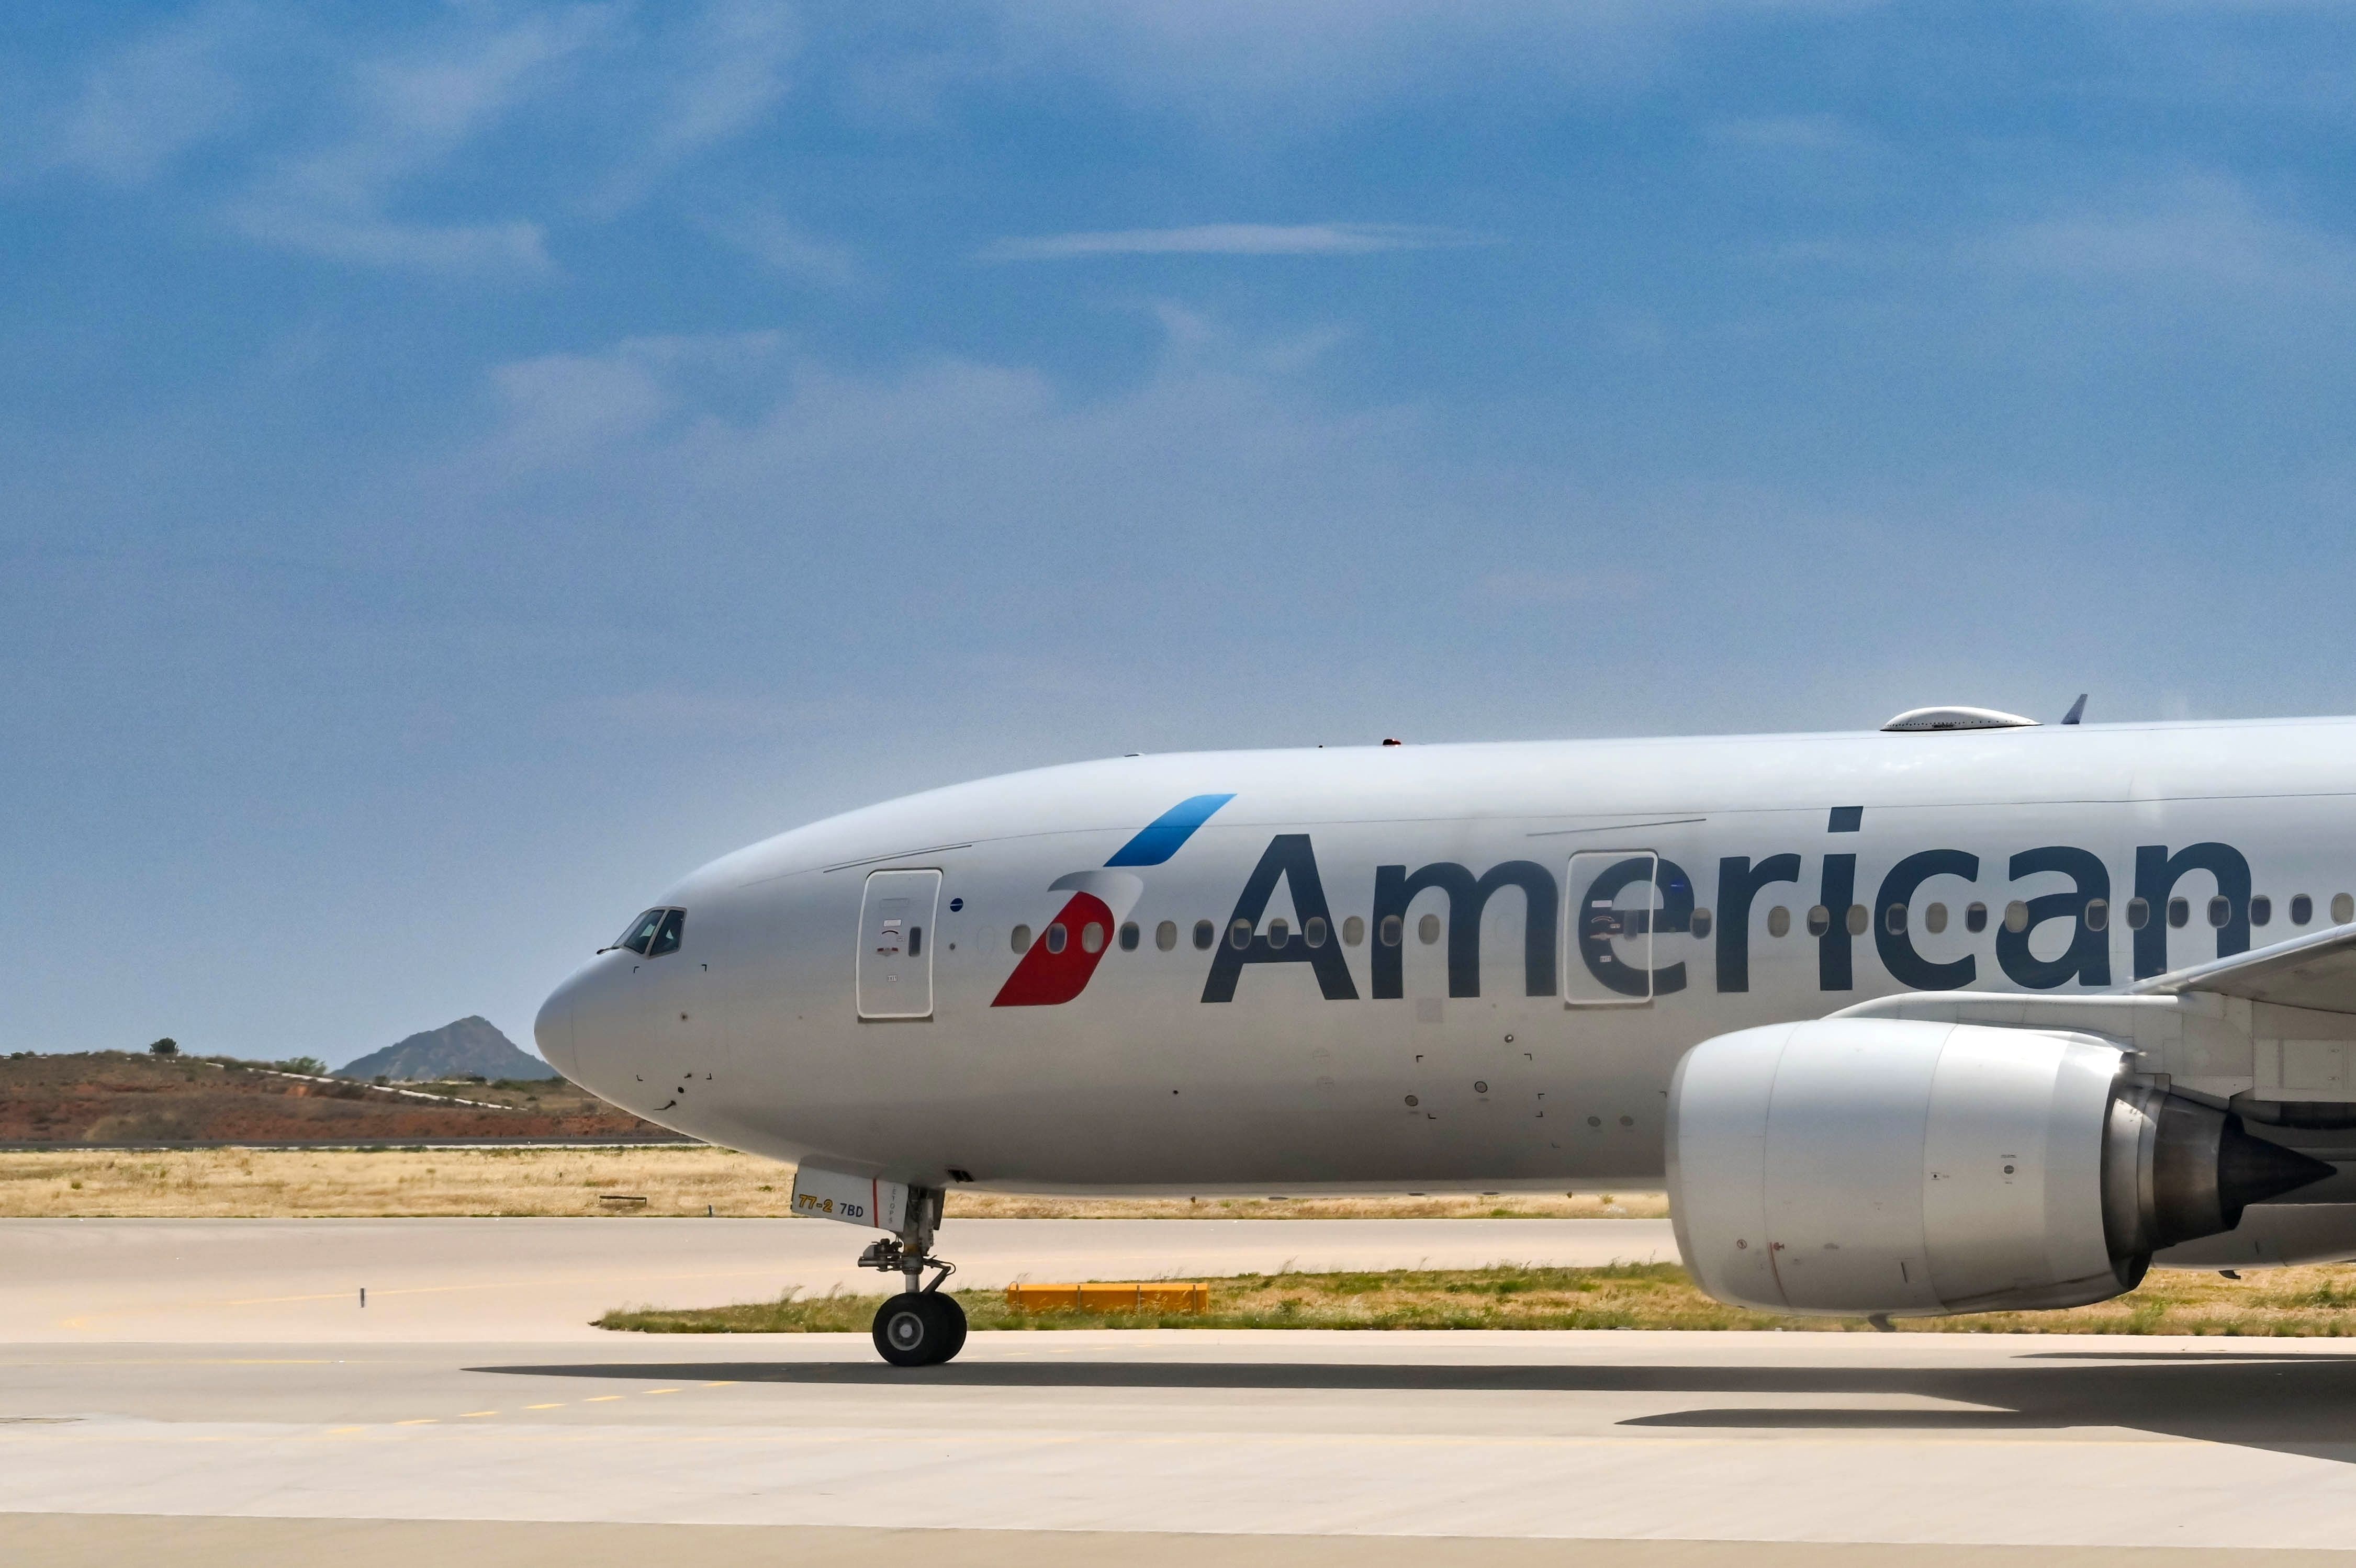 An American Airlines Boeing 777-200ER on an airport apron.